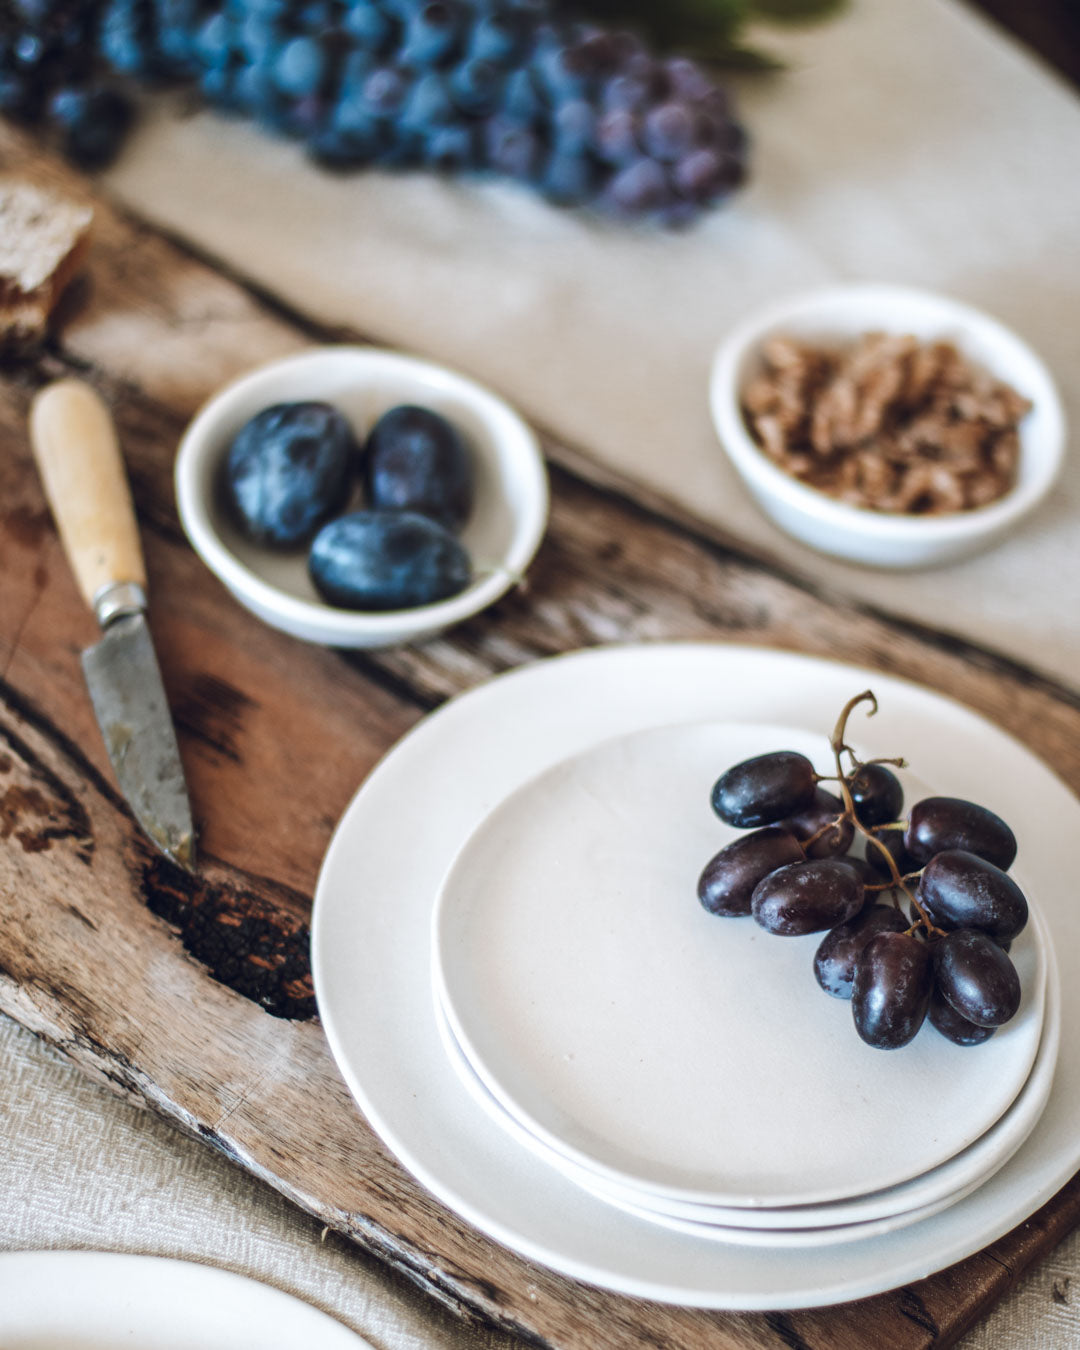 Grapes and plums on a handmade ceramic plates